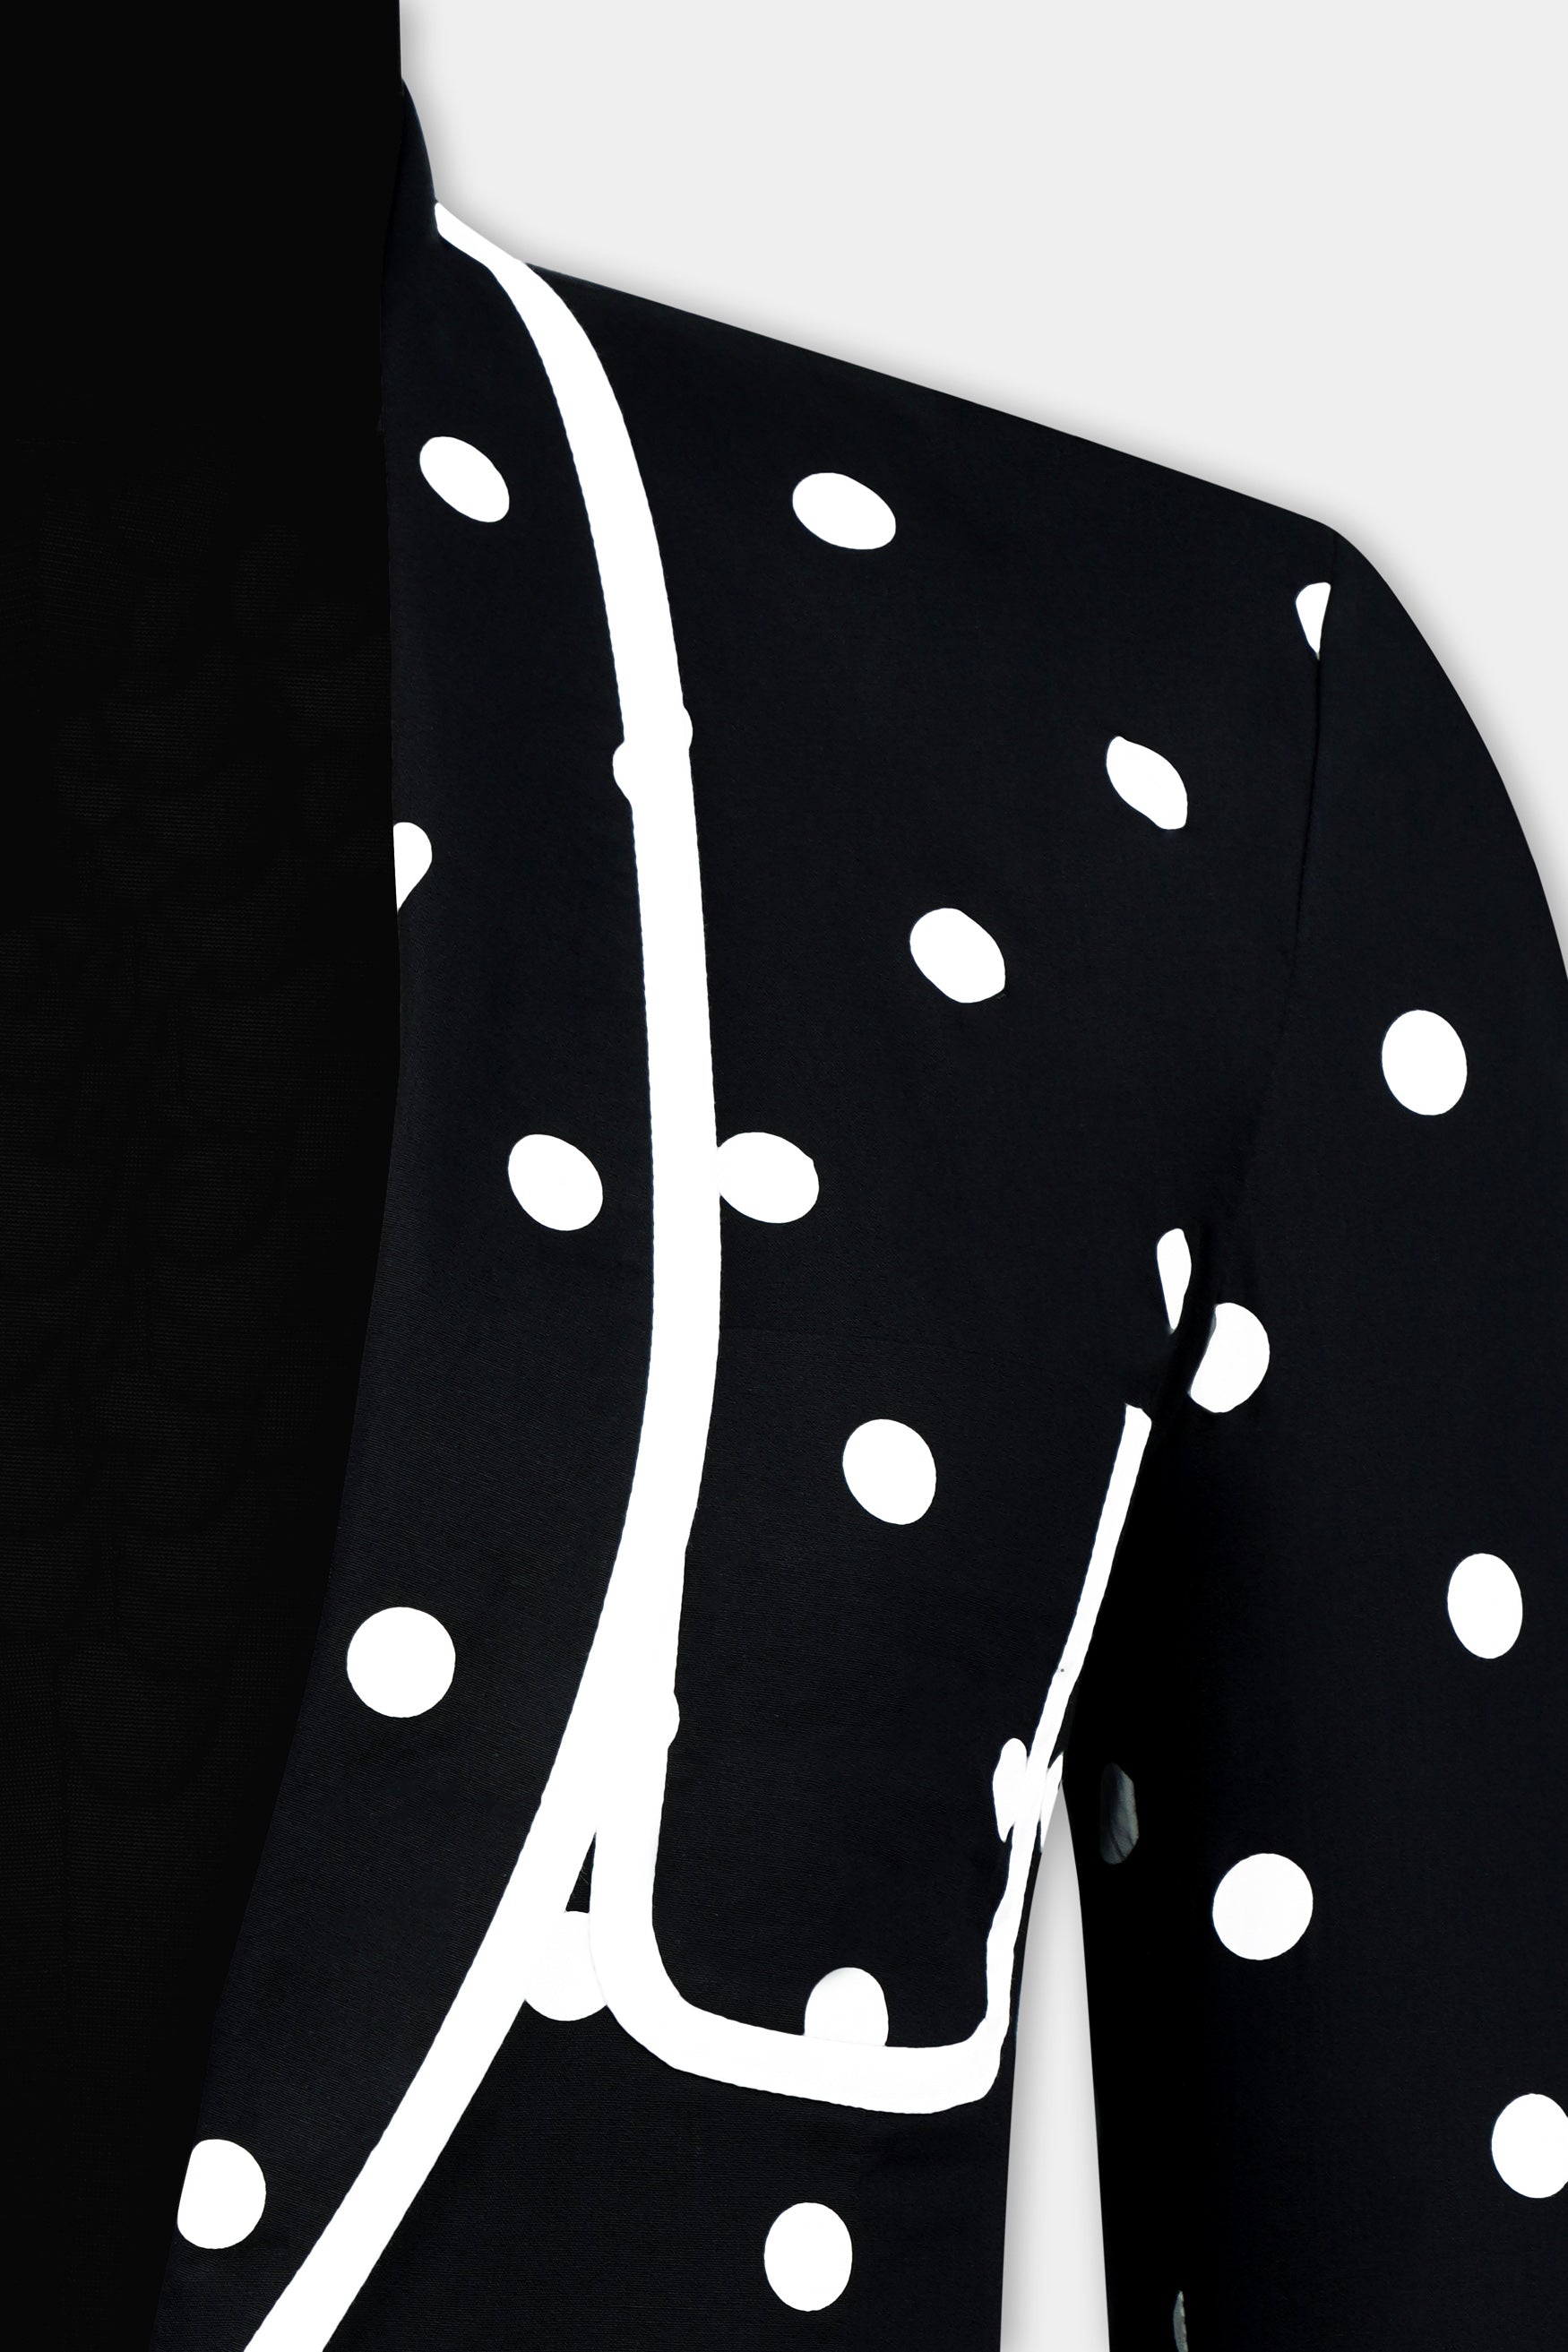 Jade Black and Bright White Polka Dotted With White Piping Work Premium Cotton Women’s Designer Suit